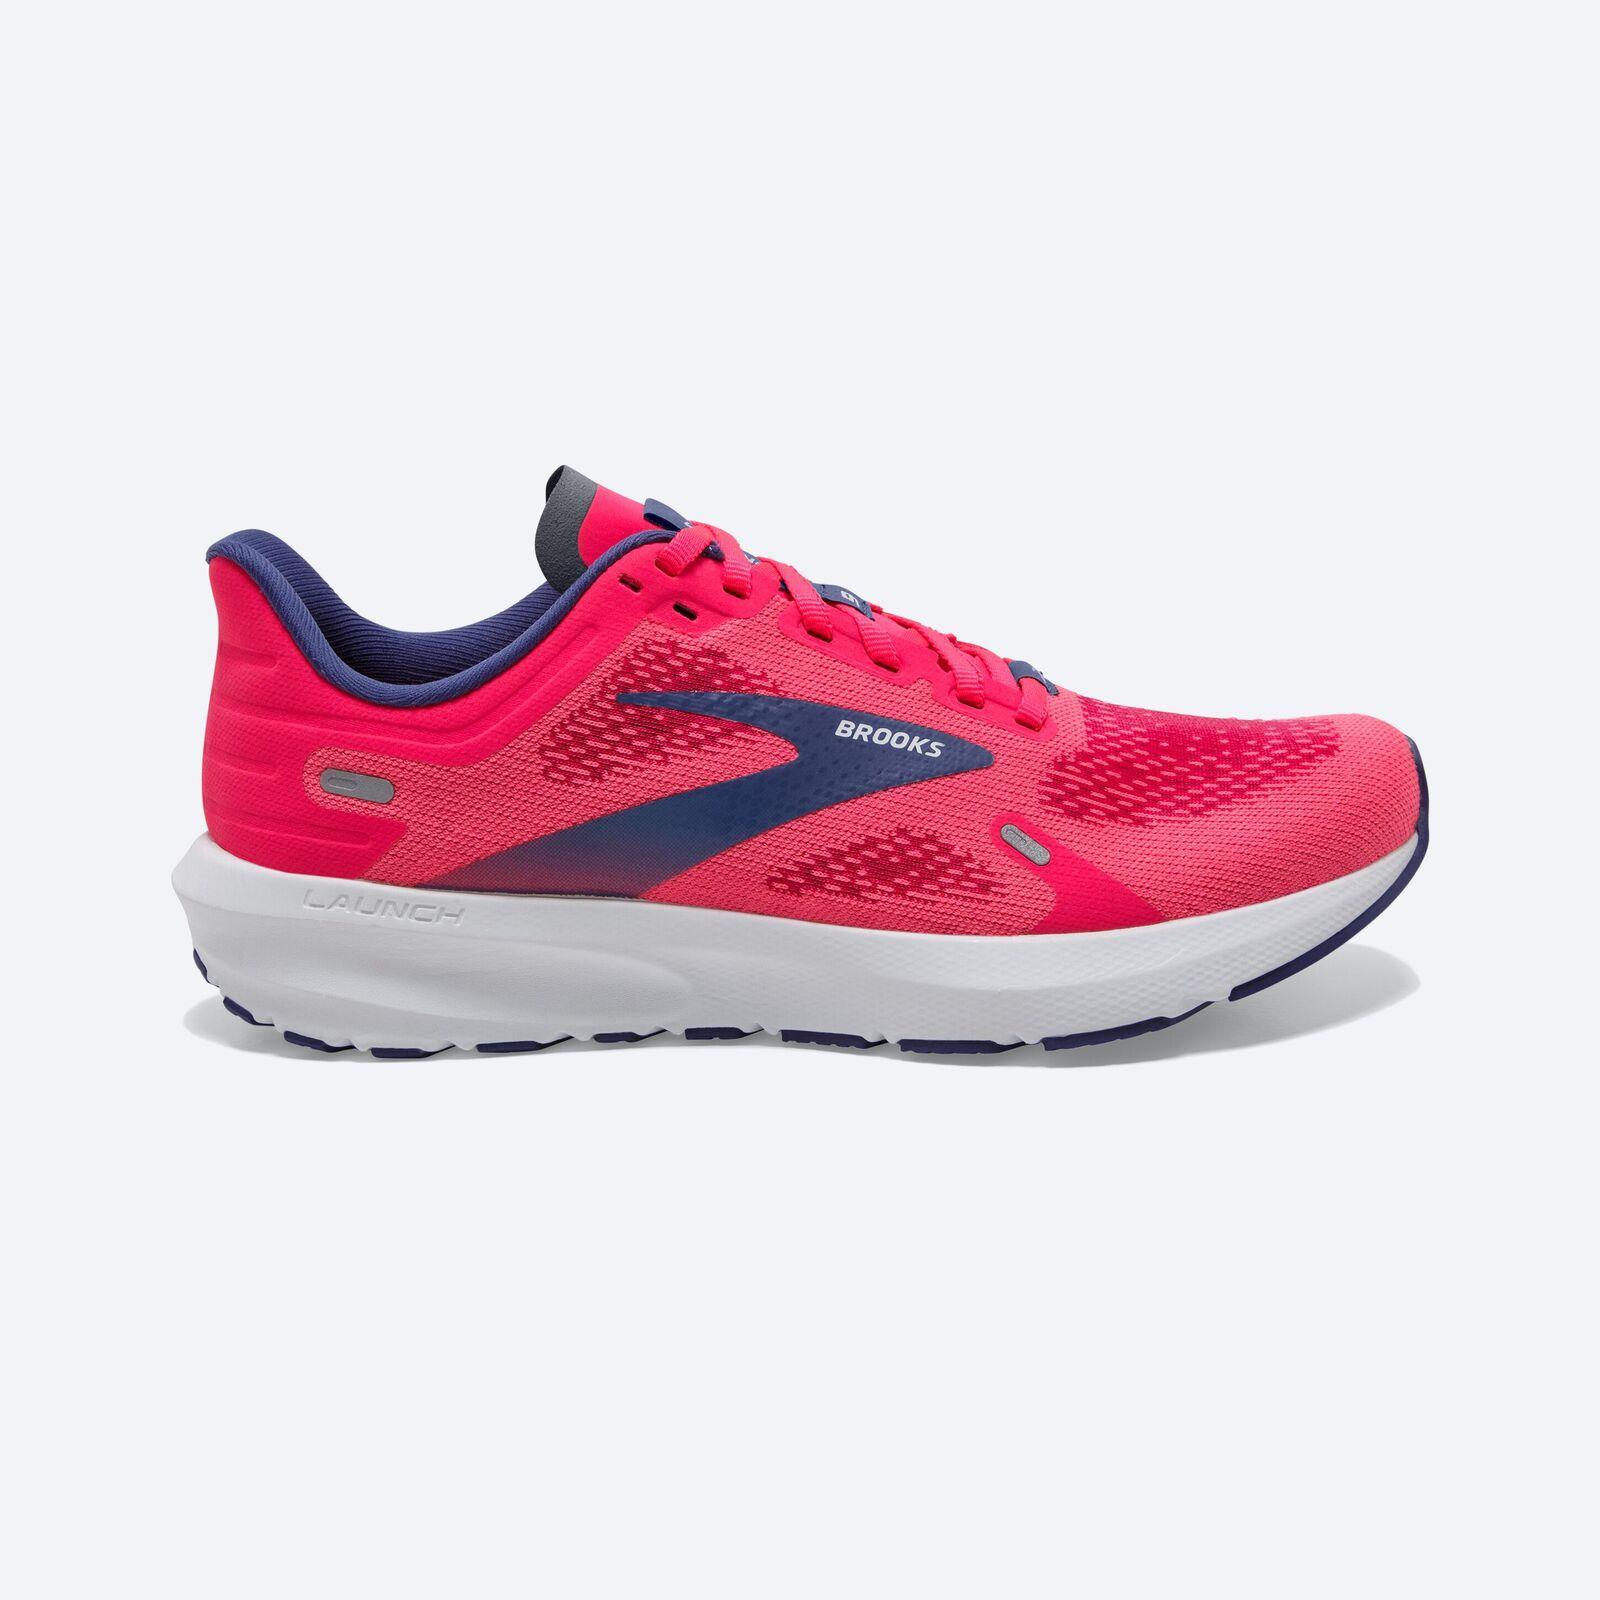 Brooks Womens Launch 9 Sneakers Shoes Athletic Road Running-Pink/Fuchsia/Cobalt - US 11